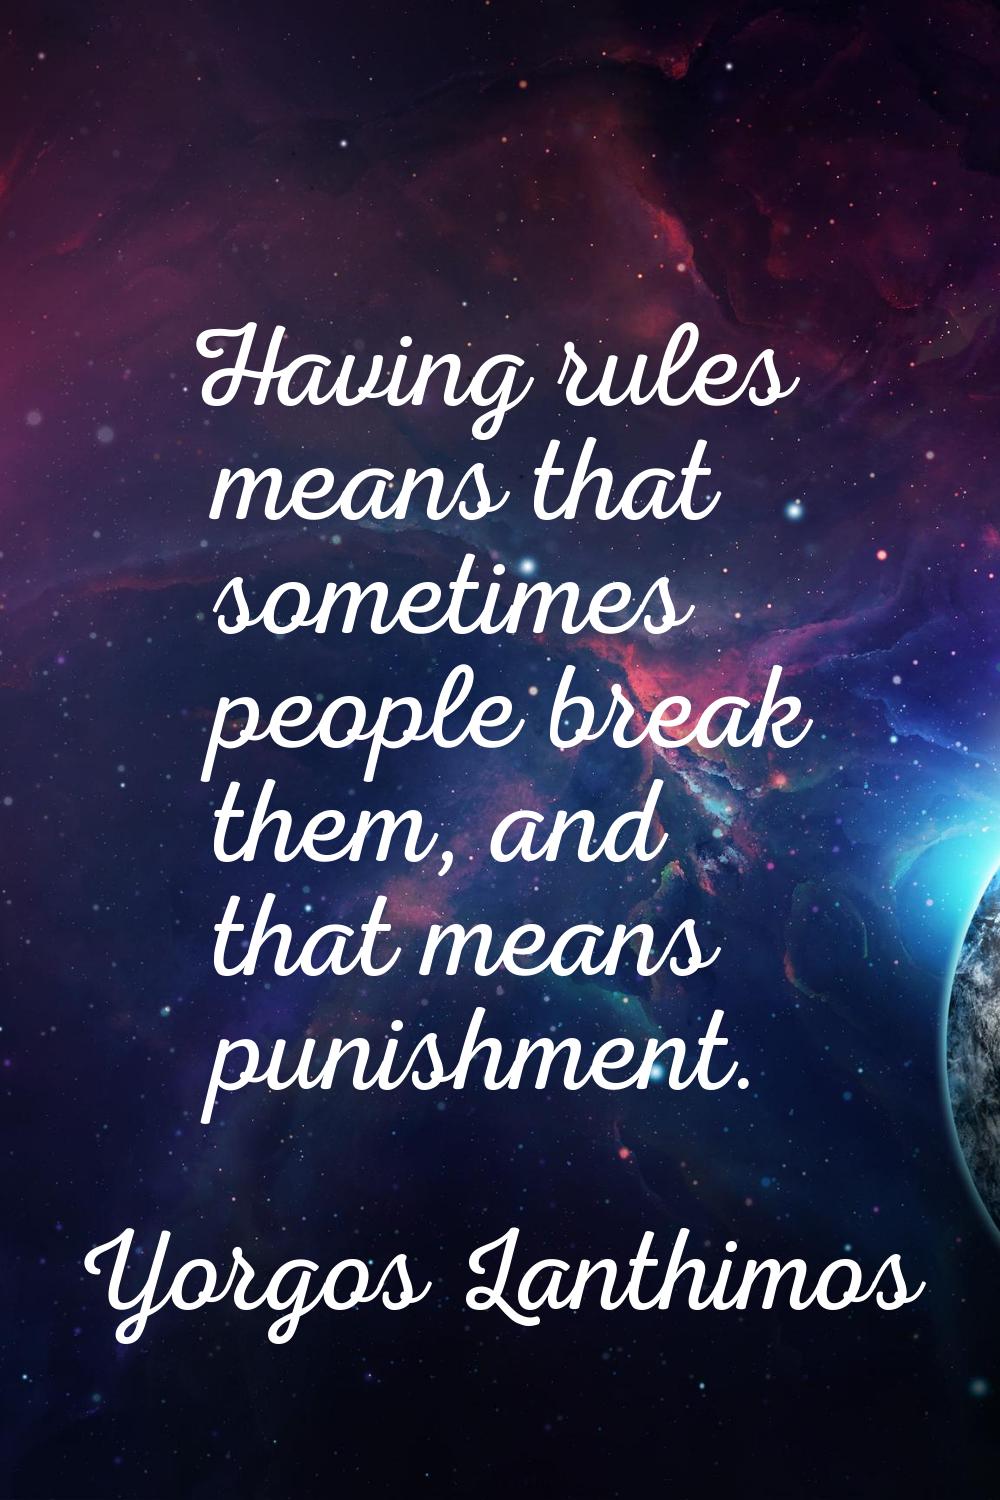 Having rules means that sometimes people break them, and that means punishment.